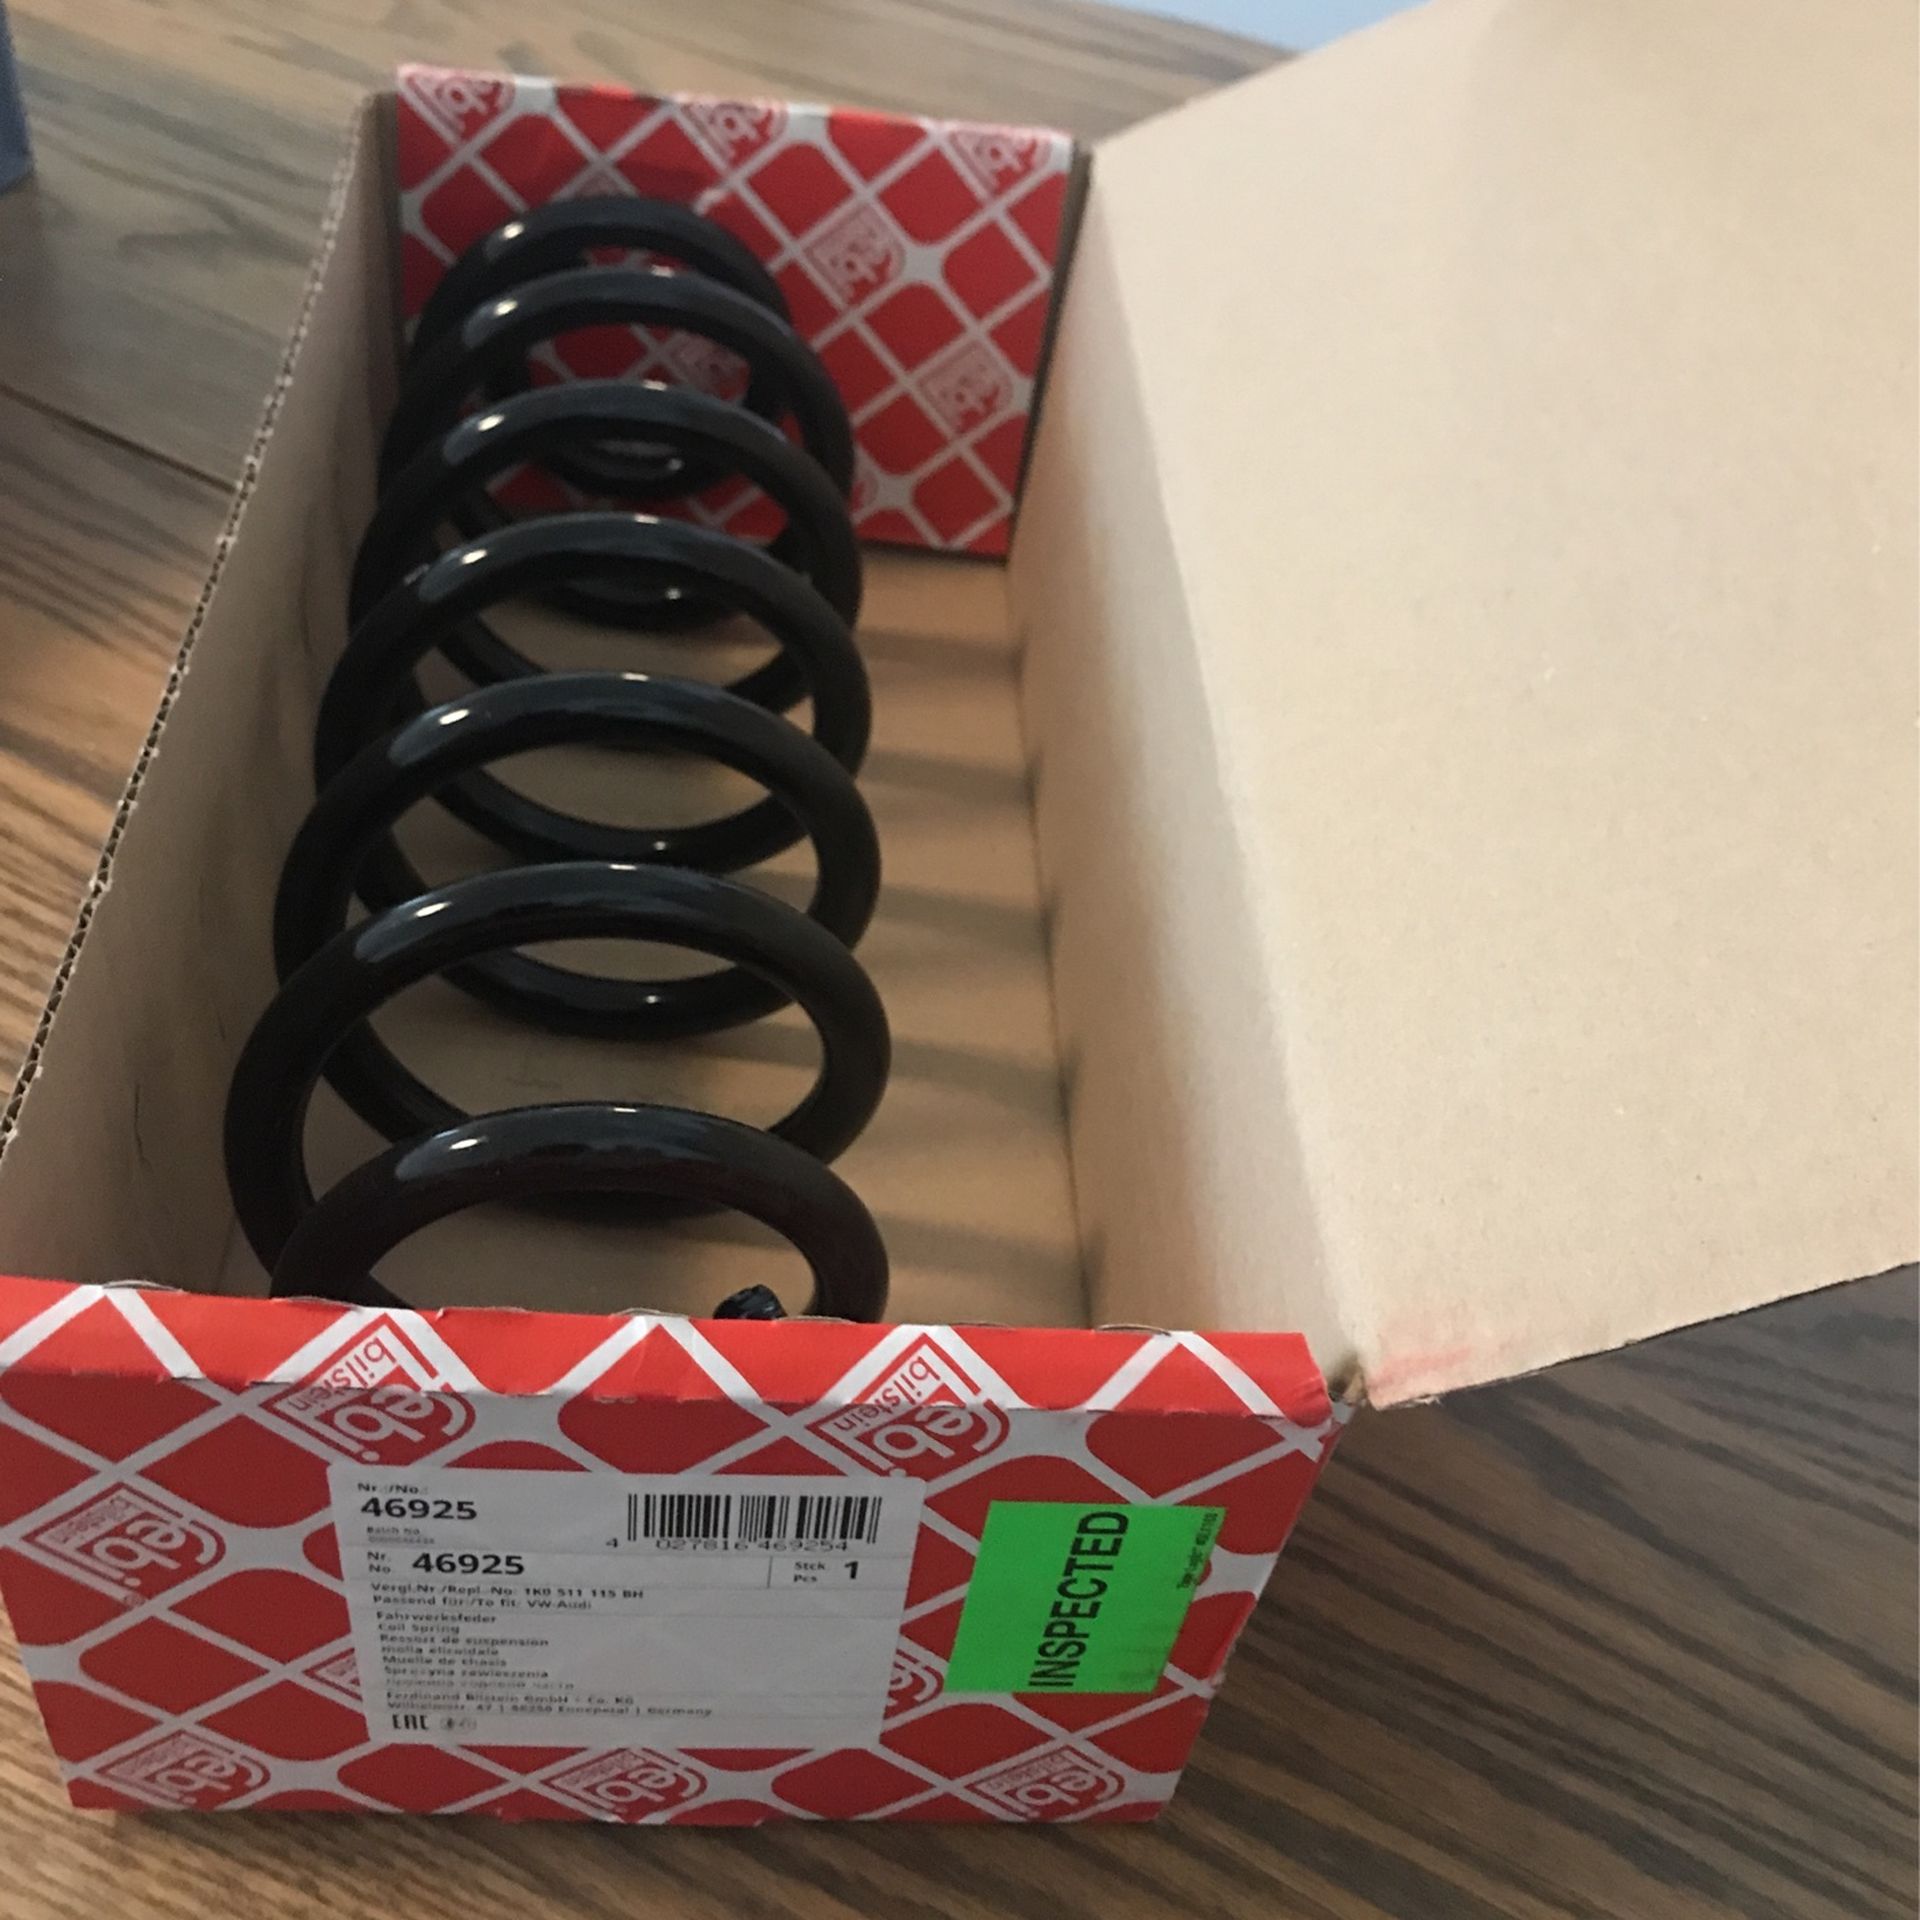 4 NEW Original Auto Coil Springs,seat.1,2,3,4 Suspension VW Audi Febi Belstein OEM Netherlands 46925 Car Foreign German Chevy 